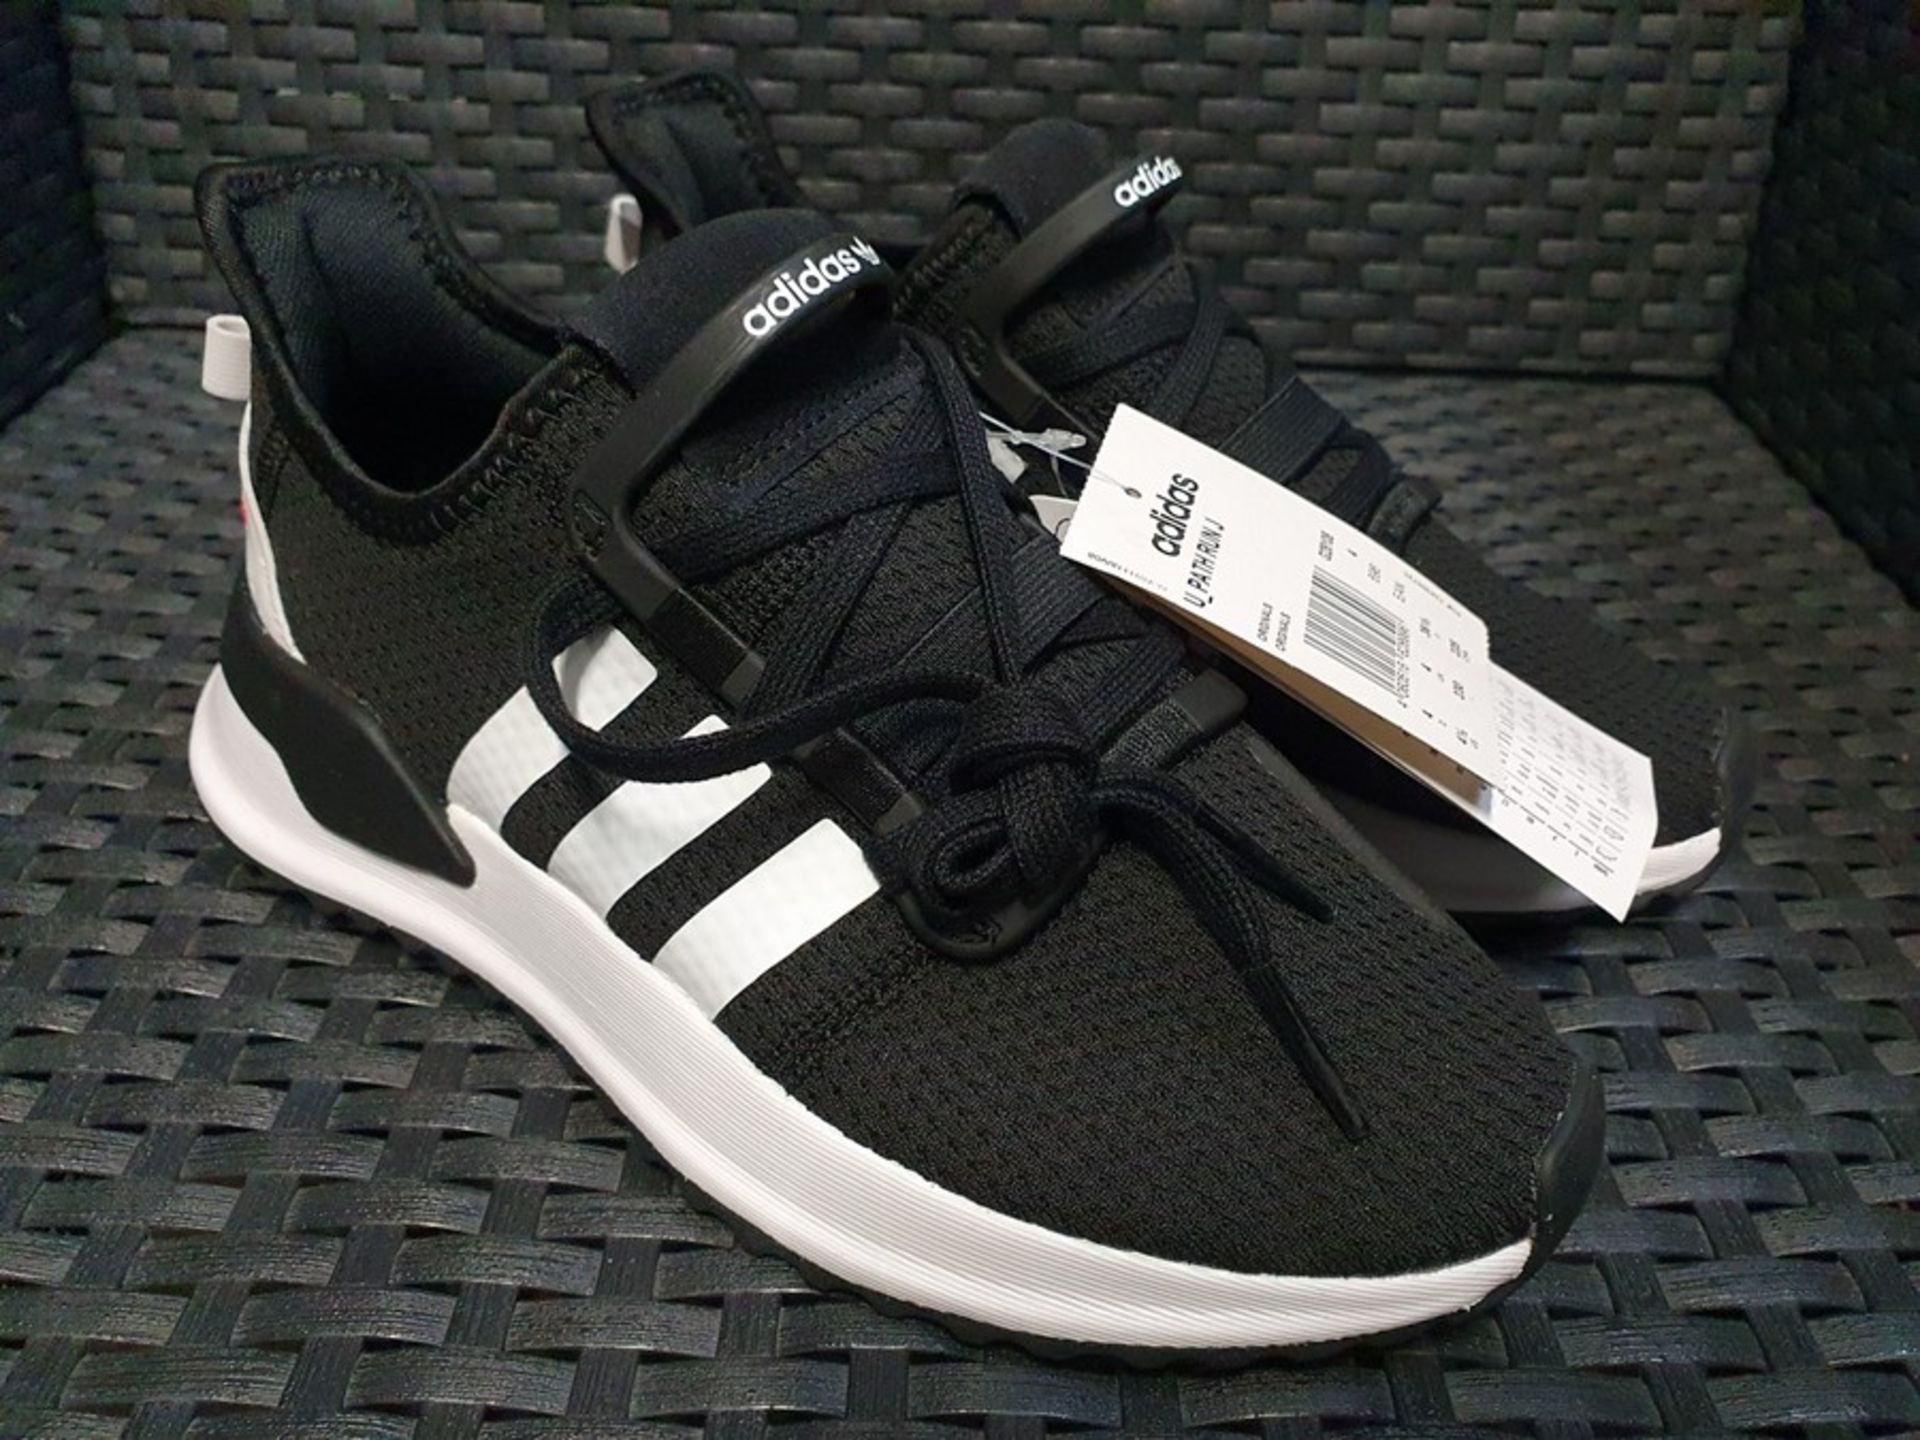 ONE PAIR OF ADIDAS U PATH RUN TRAINERS IN BLACK - SIZE UK 4. RRP £50.00. GRADE A* - AS NEW WITH